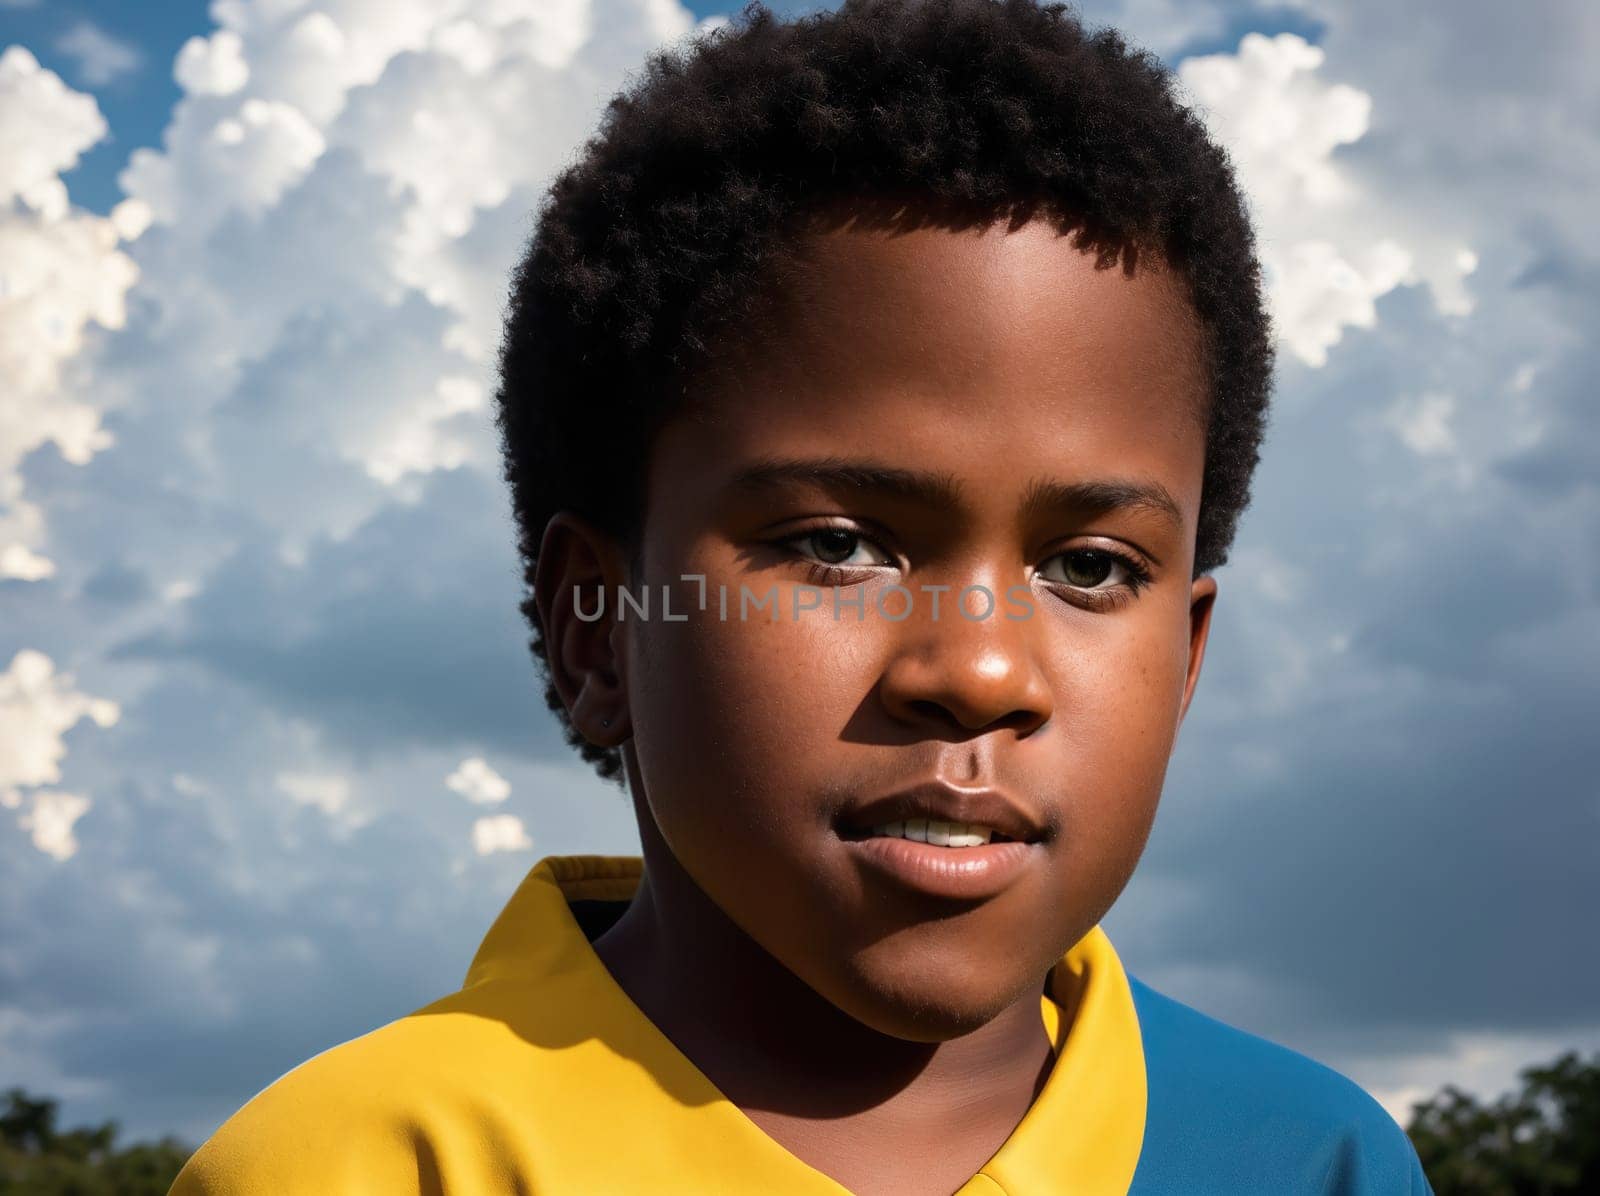 The image shows a young boy wearing a yellow shirt and standing in a field with a cloudy sky in the background.